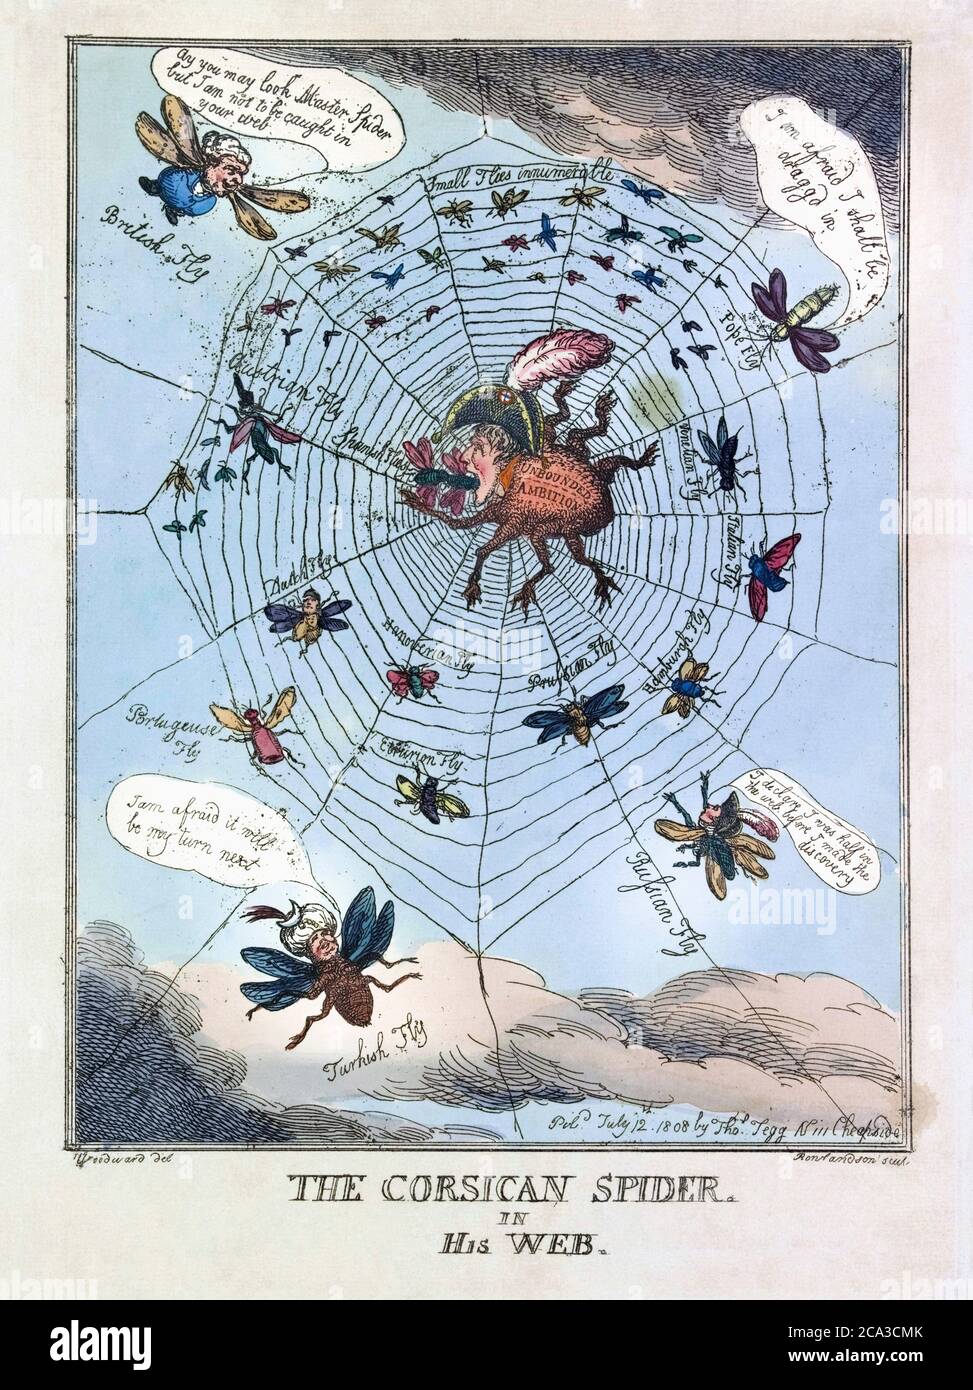 The Corsican Spider in His Web. Political cartoon dated July 12, 1808, showing Napoleon as a spider devouring European countries trapped in his web. Stock Photo